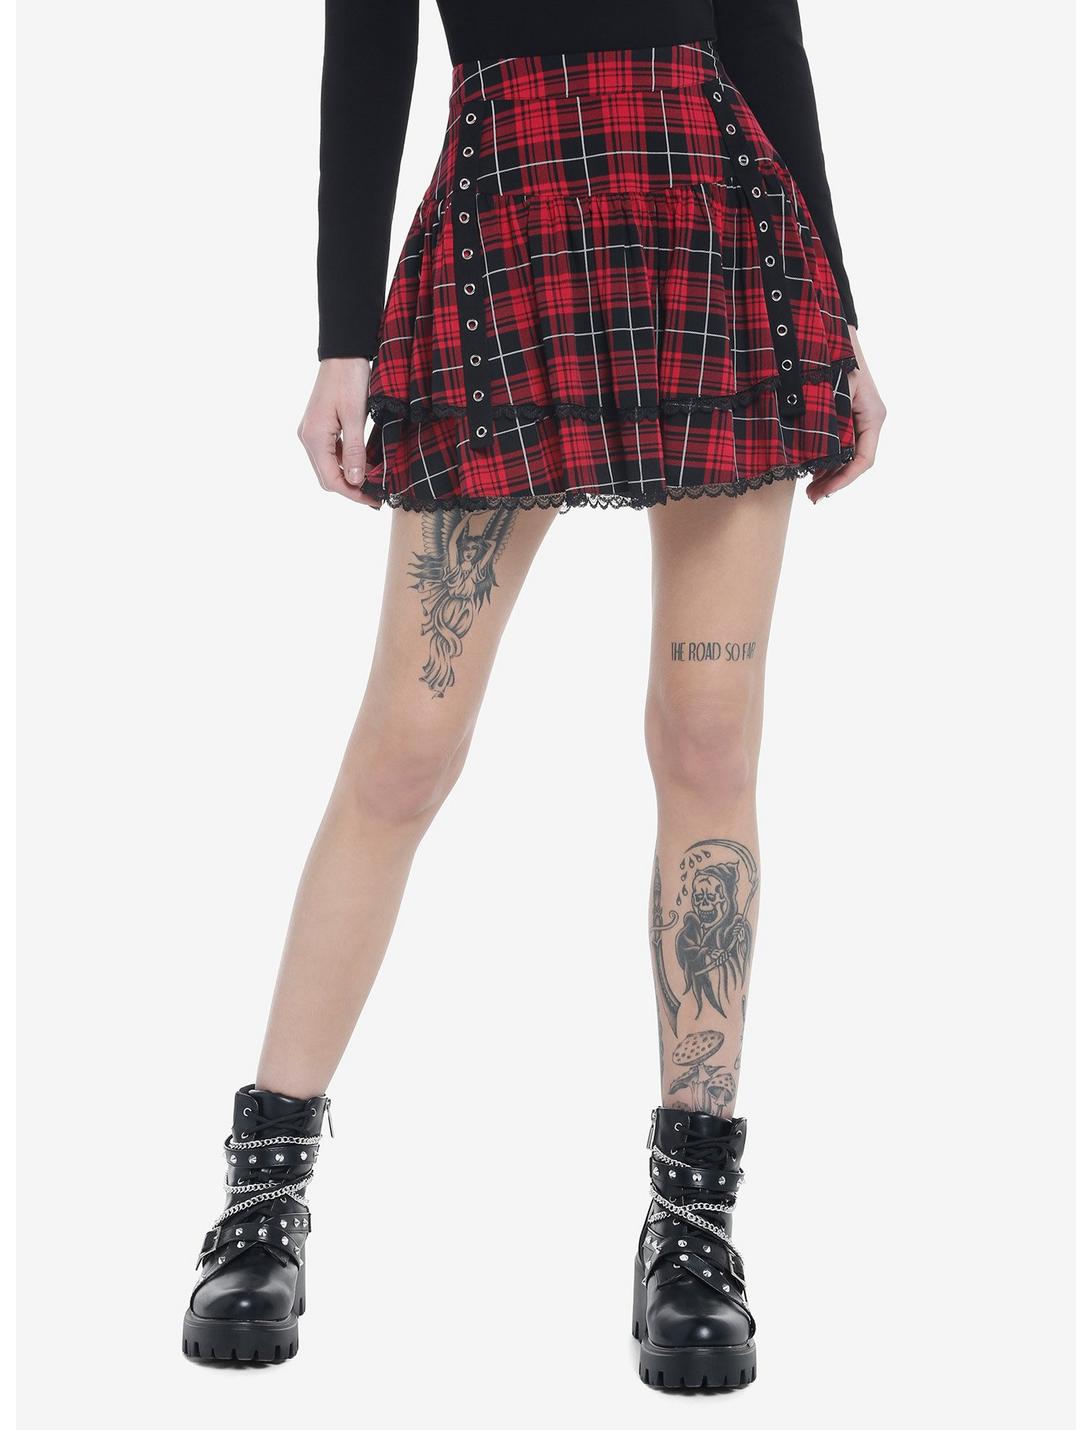 Red Plaid Grommet Straps Tiered Skirt, PLAID-RED, hi-res